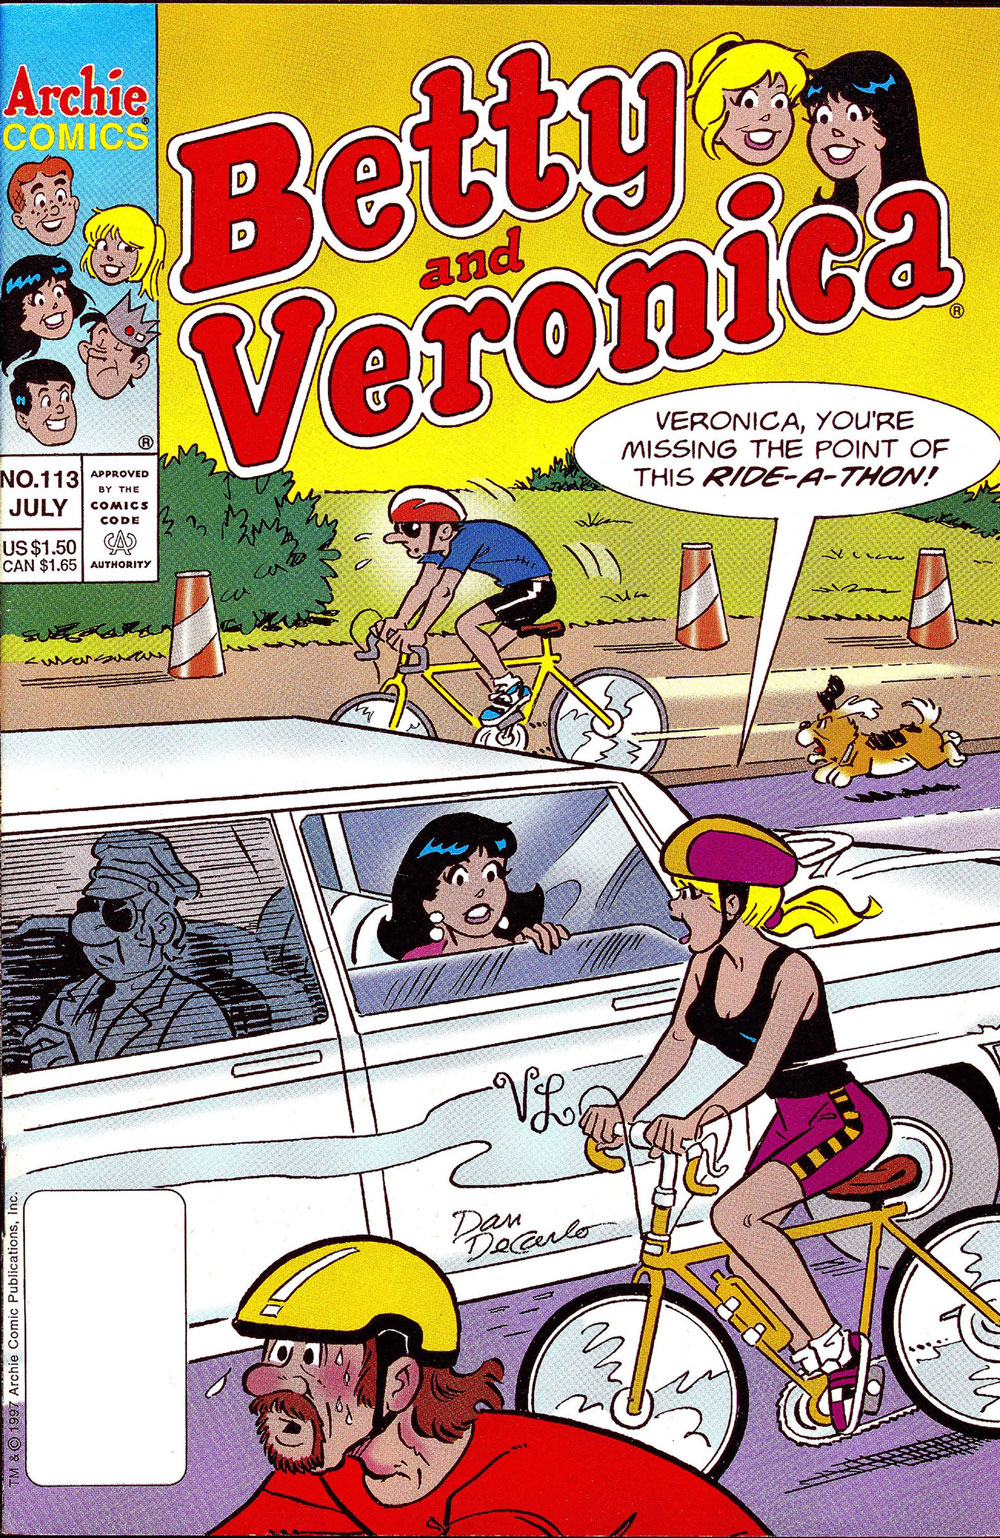 The cover of BETTY AND VERONICA #113. Betty is riding in a bike marathon and Veronica has joined her, but inside of her limo.